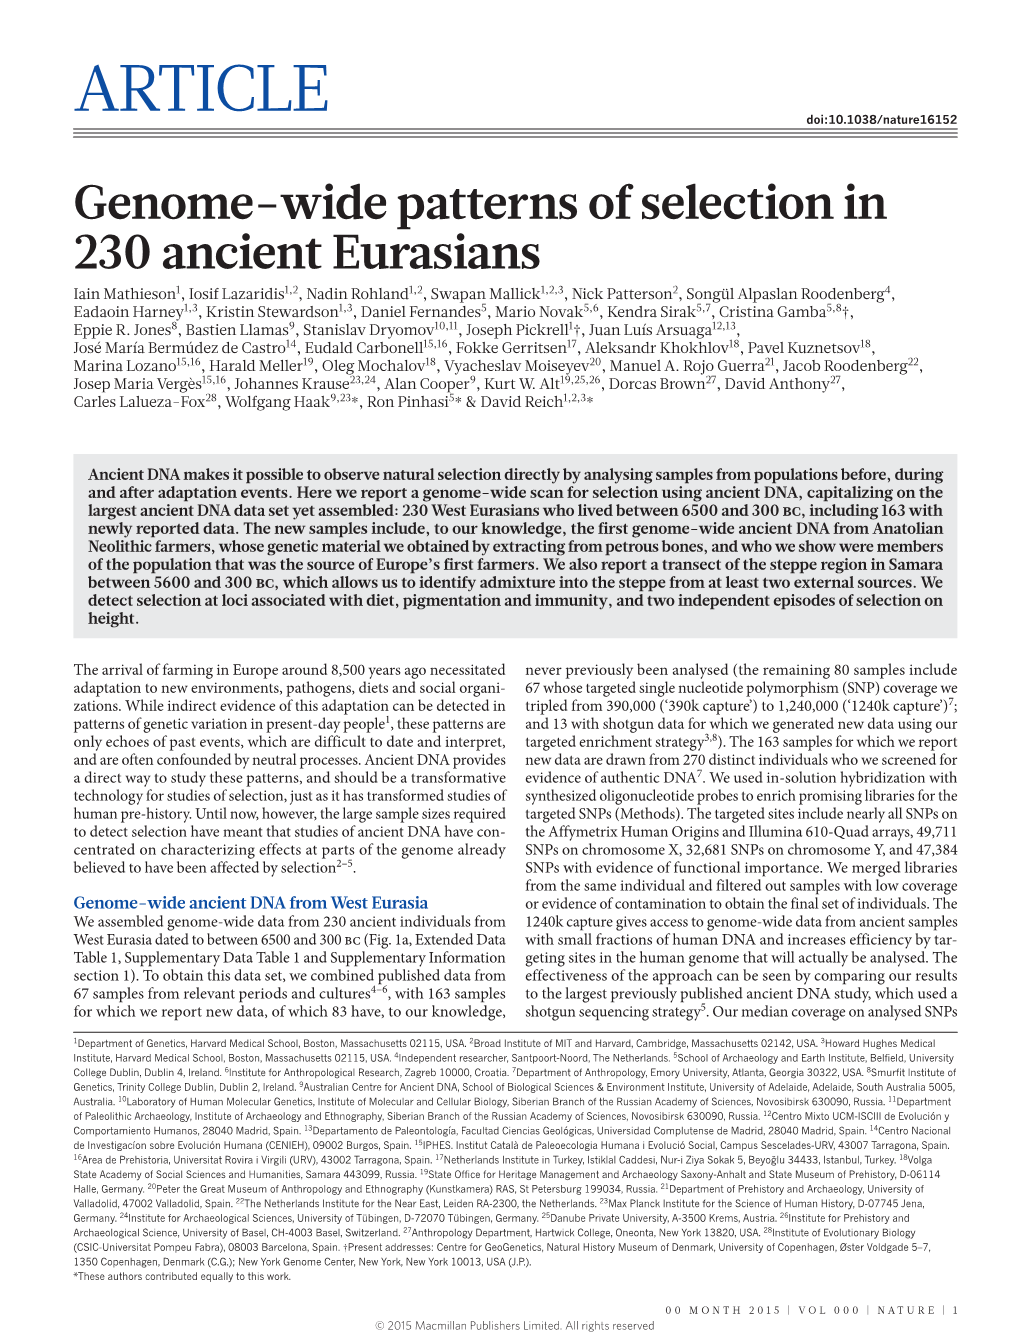 Genome-Wide Patterns of Selection in 230 Ancient Eurasians